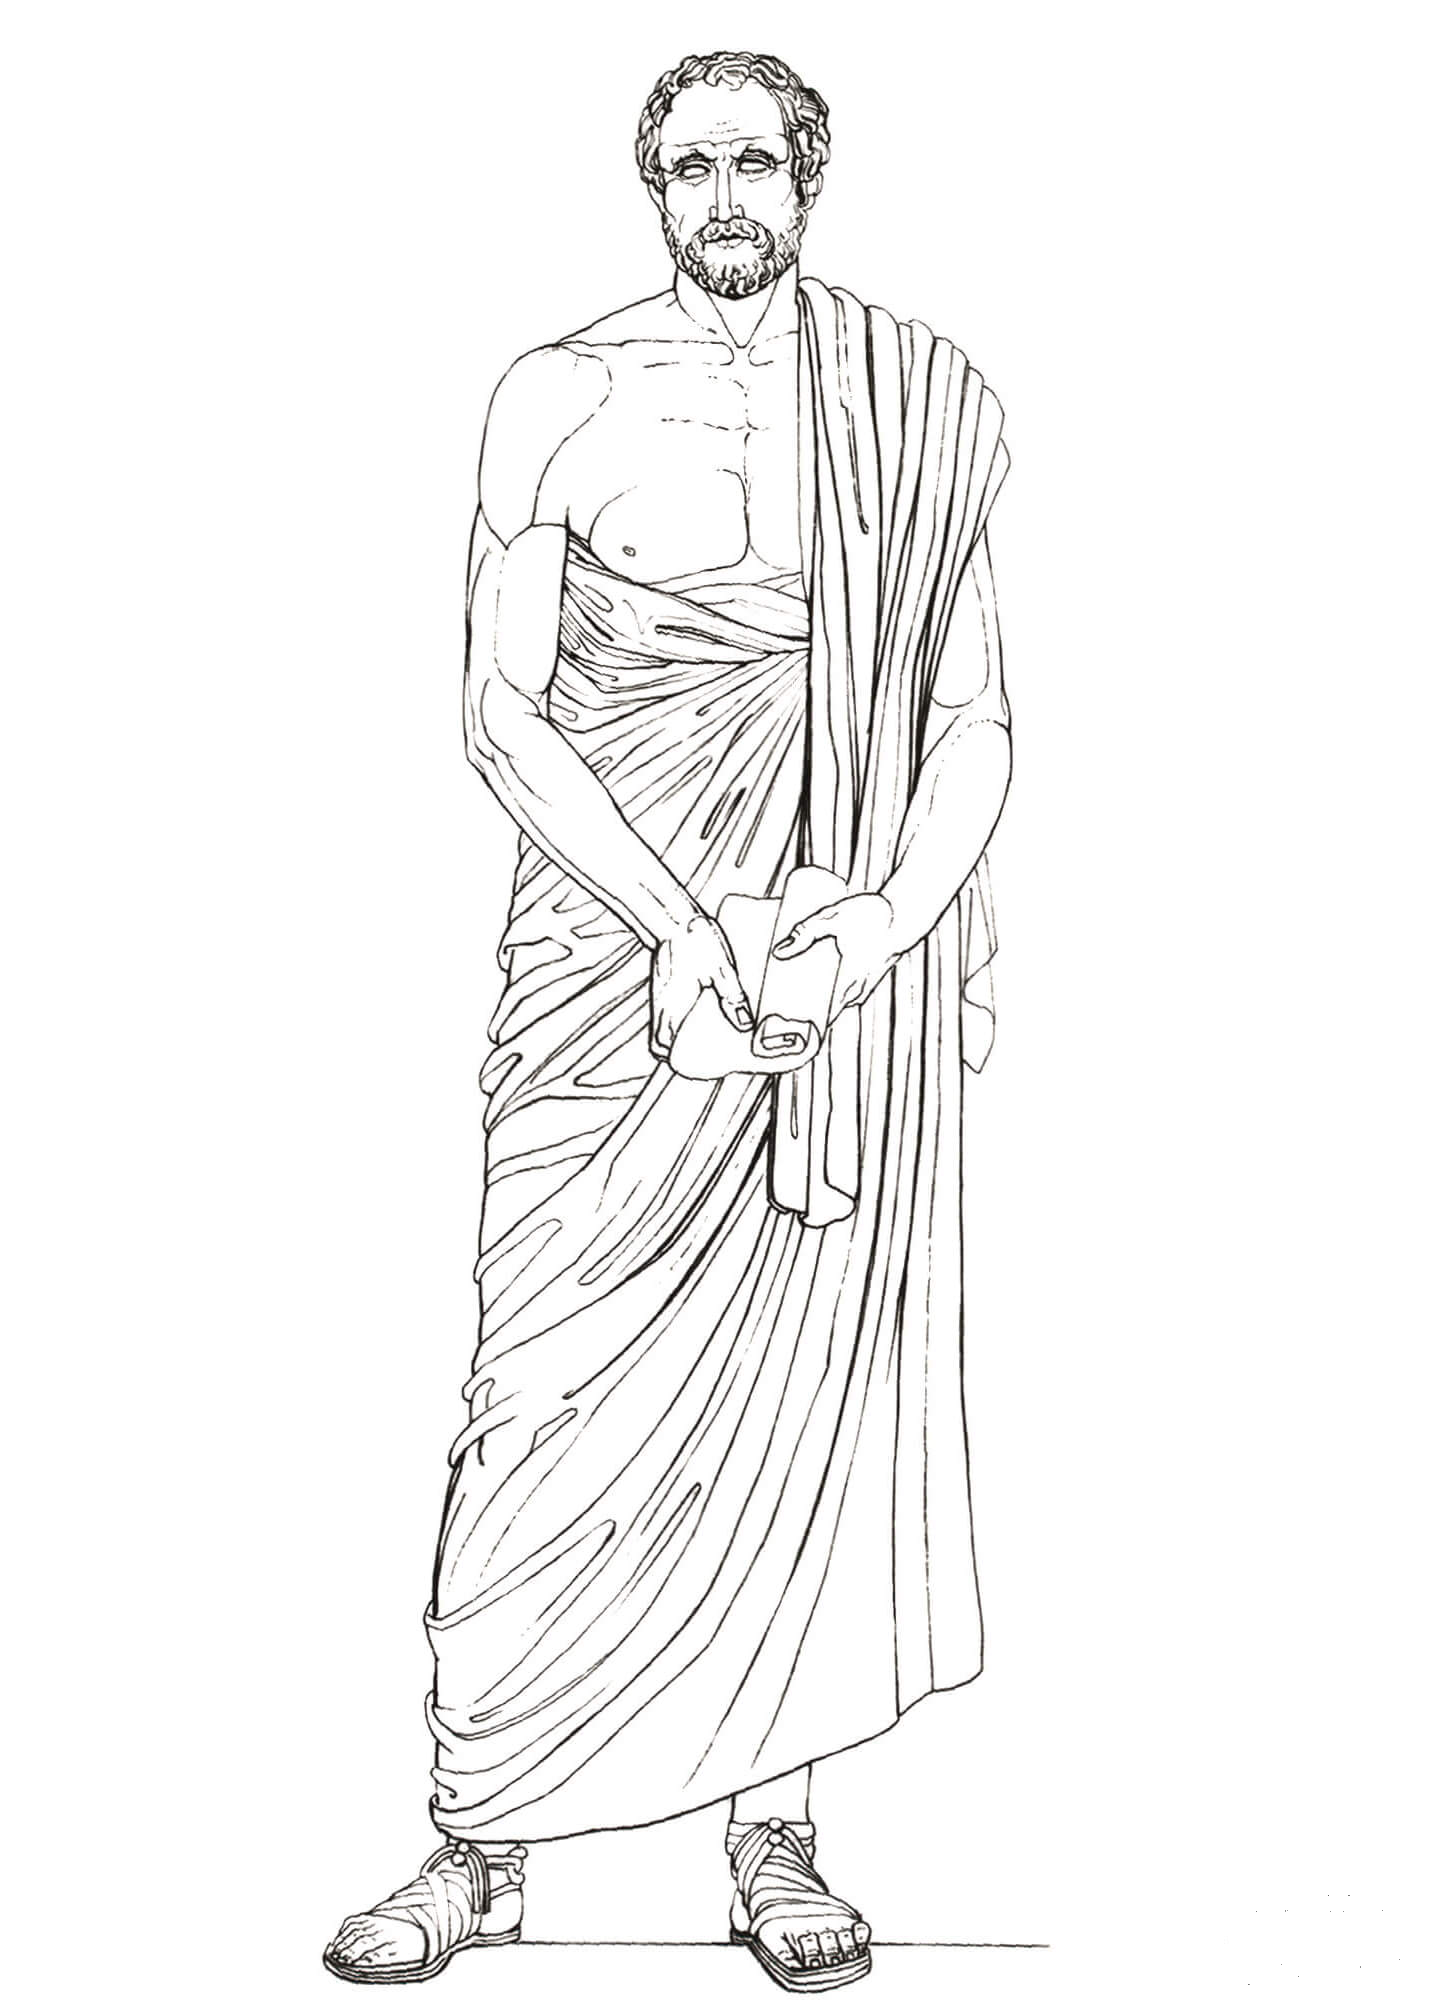 Greek Philosopher coloring page - ColouringPages